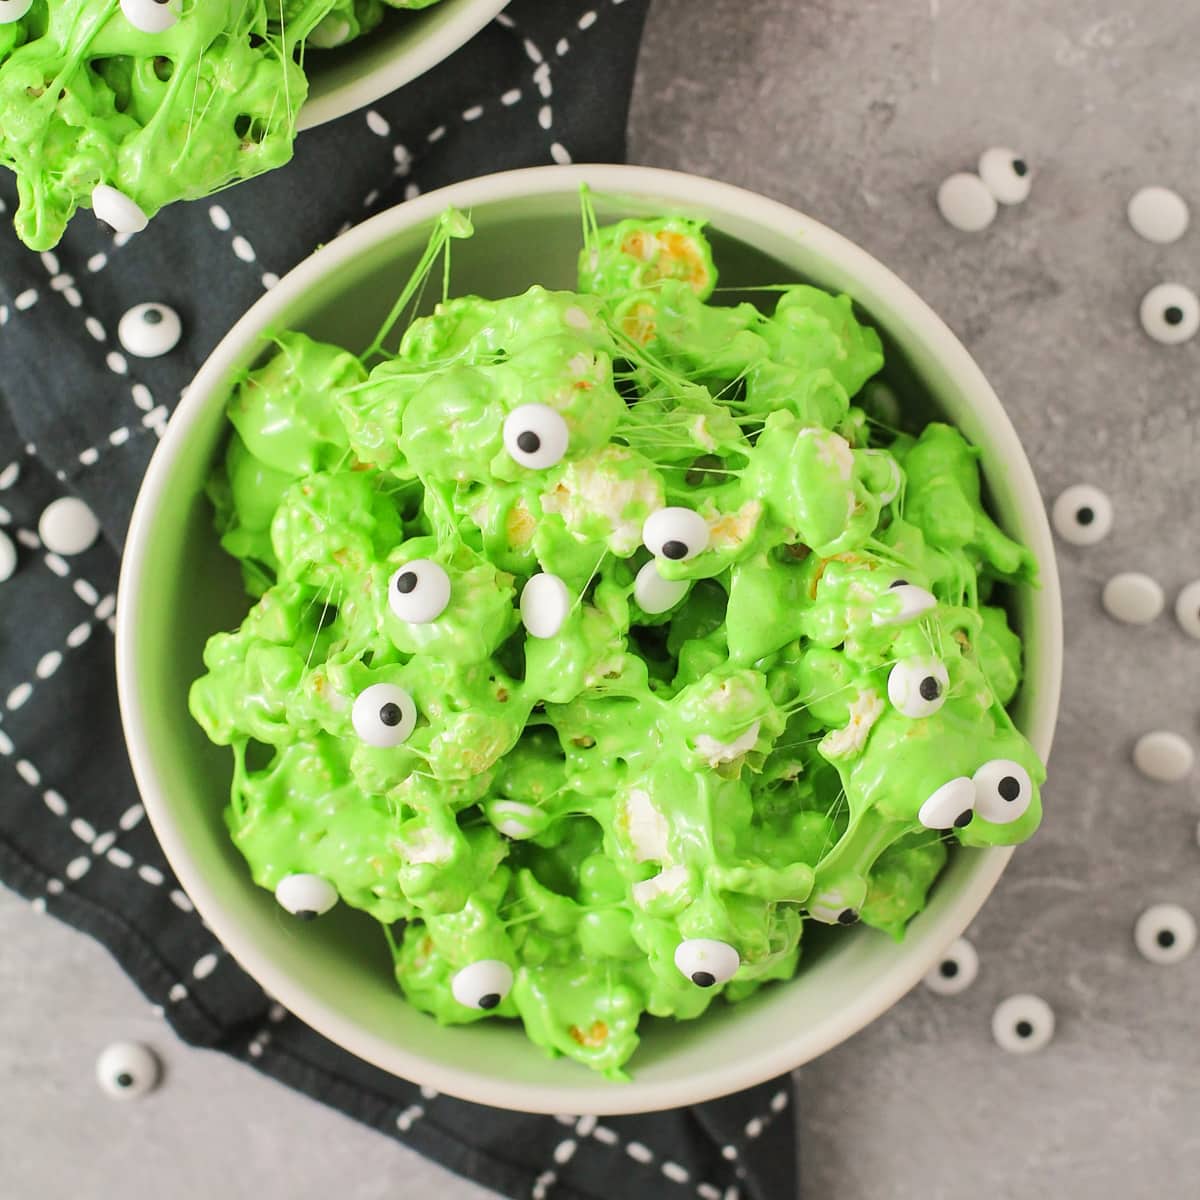 A white bowl filled with green slime popcorn with candy eyeballs.